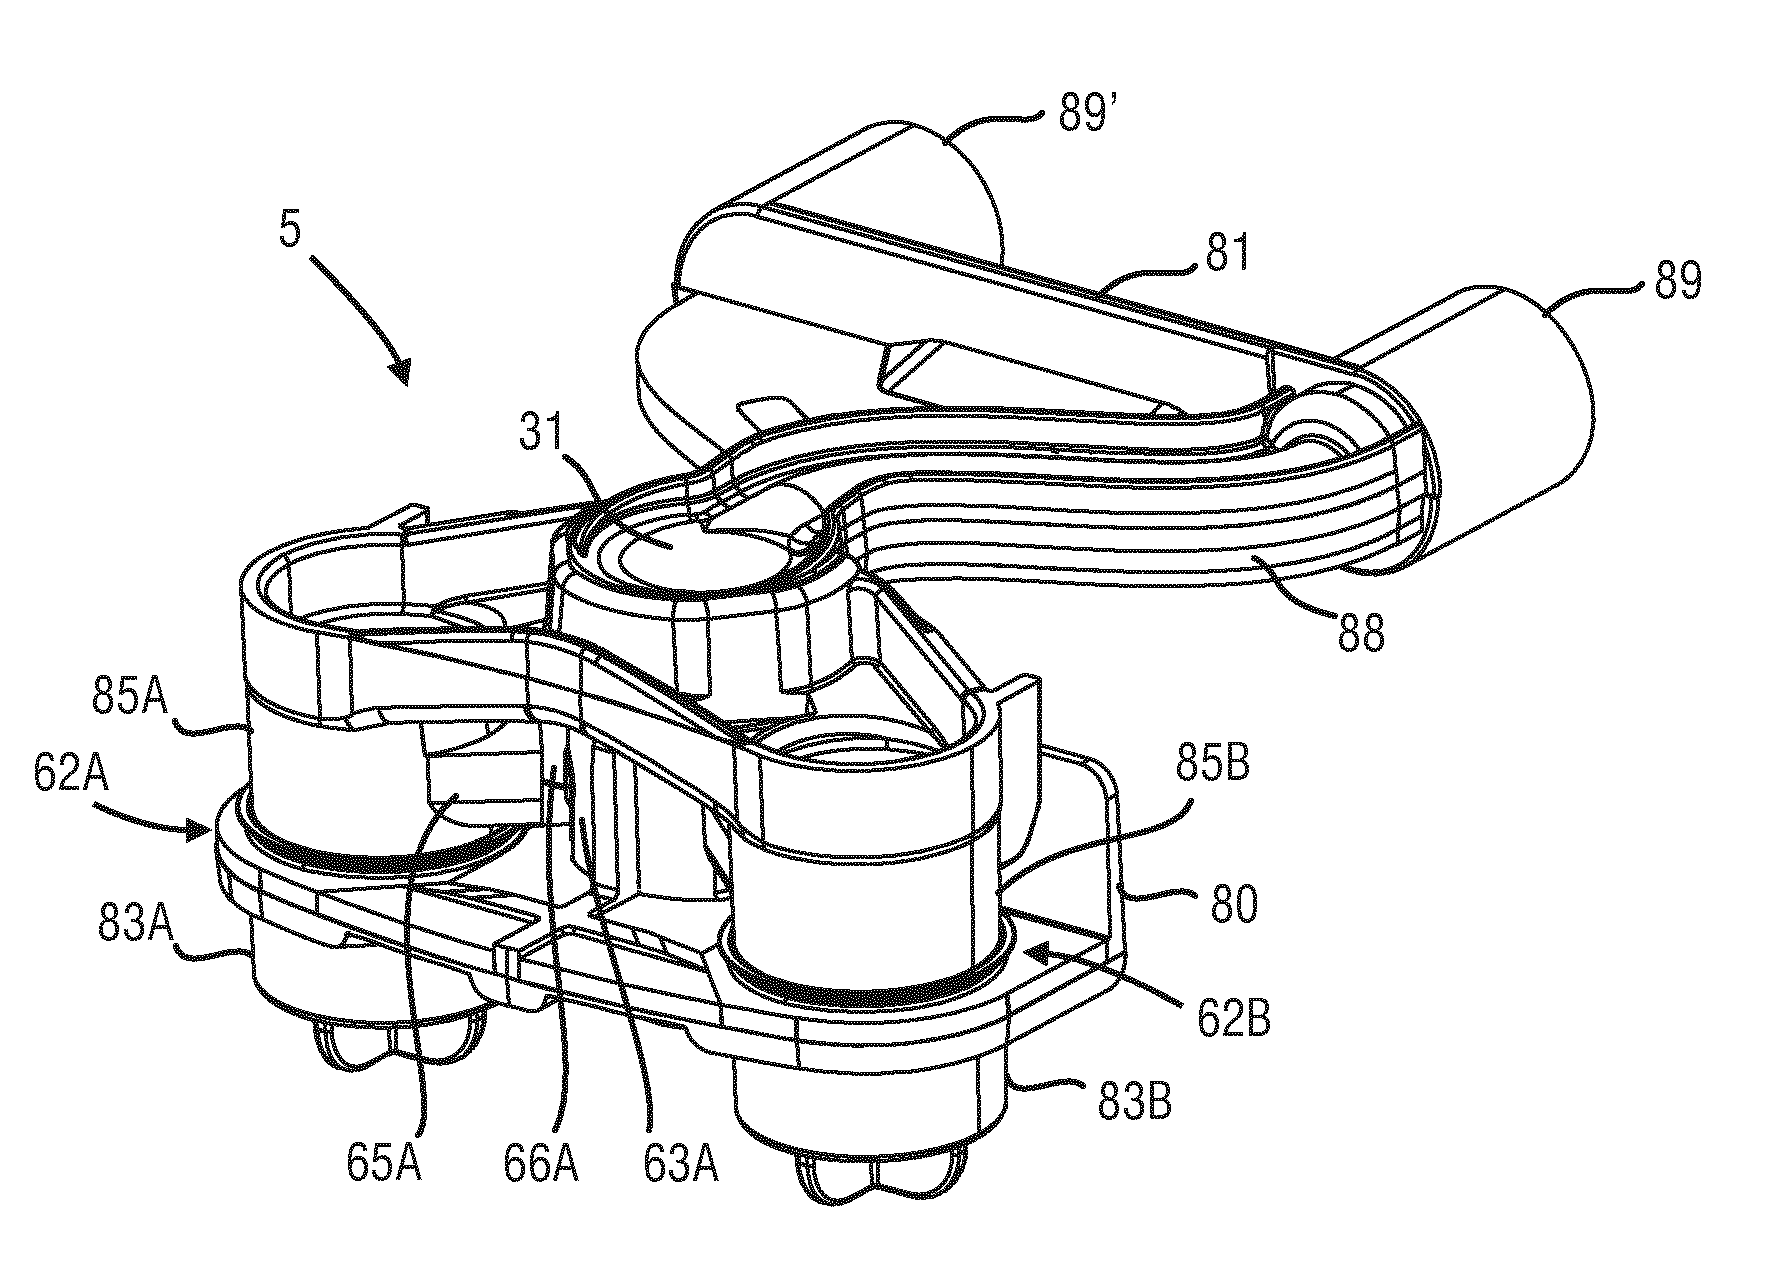 Device for frothing a liquid